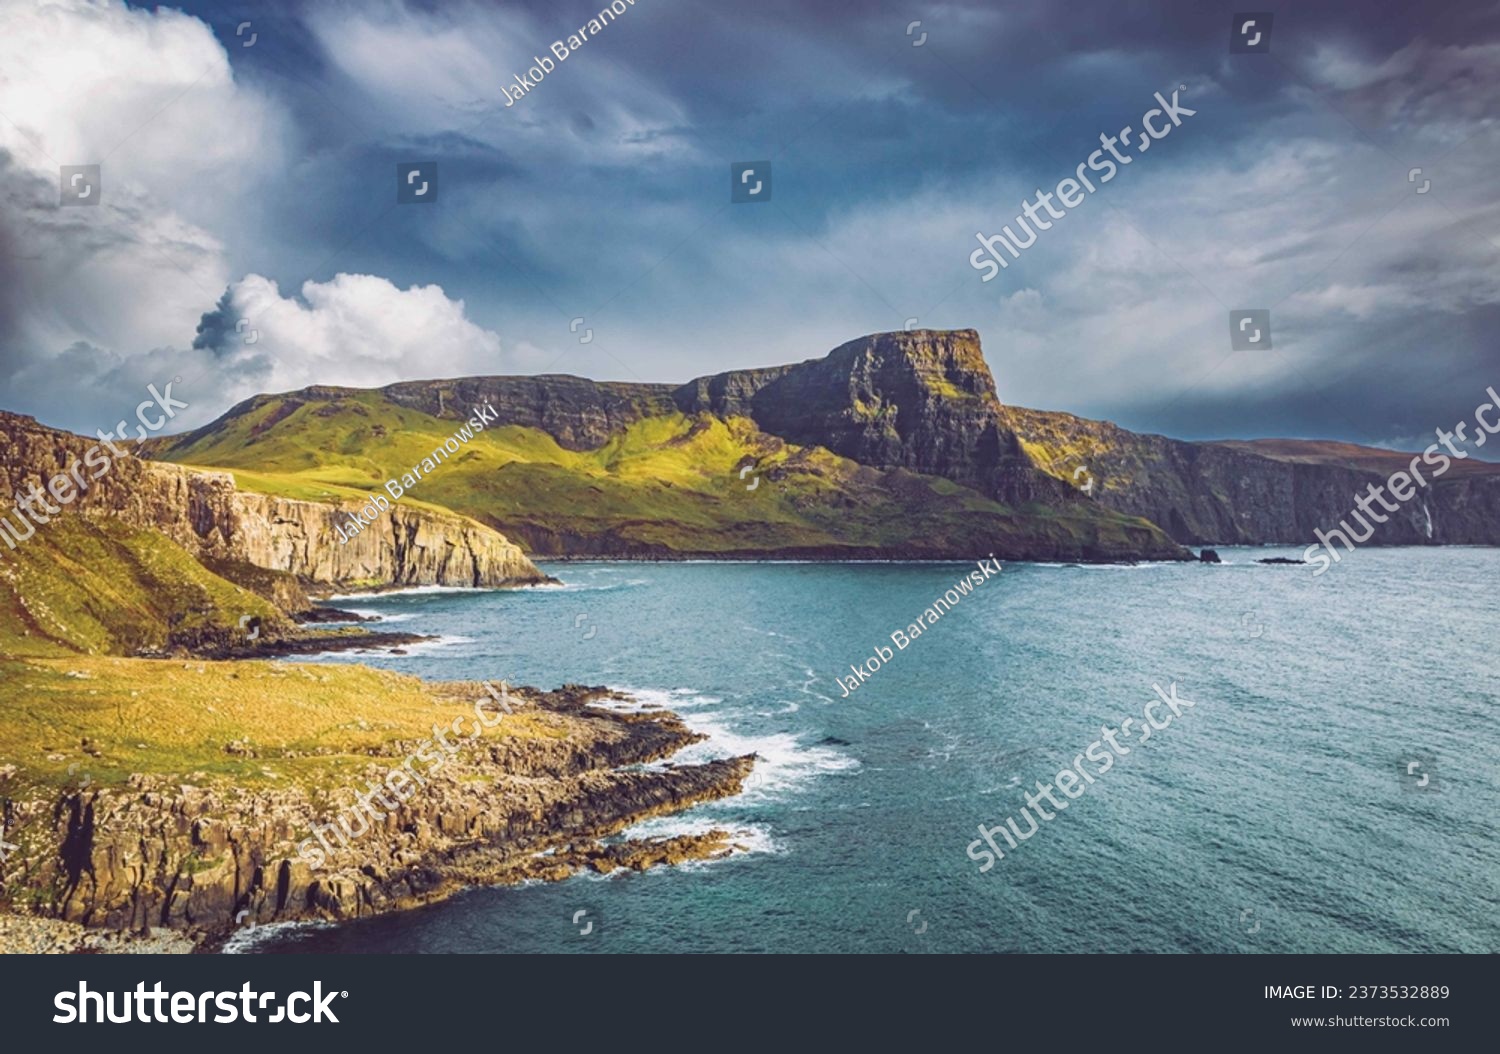 Isle of Skye is the largest island in the Inner Hebrides. It lies just off the west coast of mainland Scotland in the Atlantic Ocean.
Beautiful solitude in a quiet atmosphere without people. #2373532889